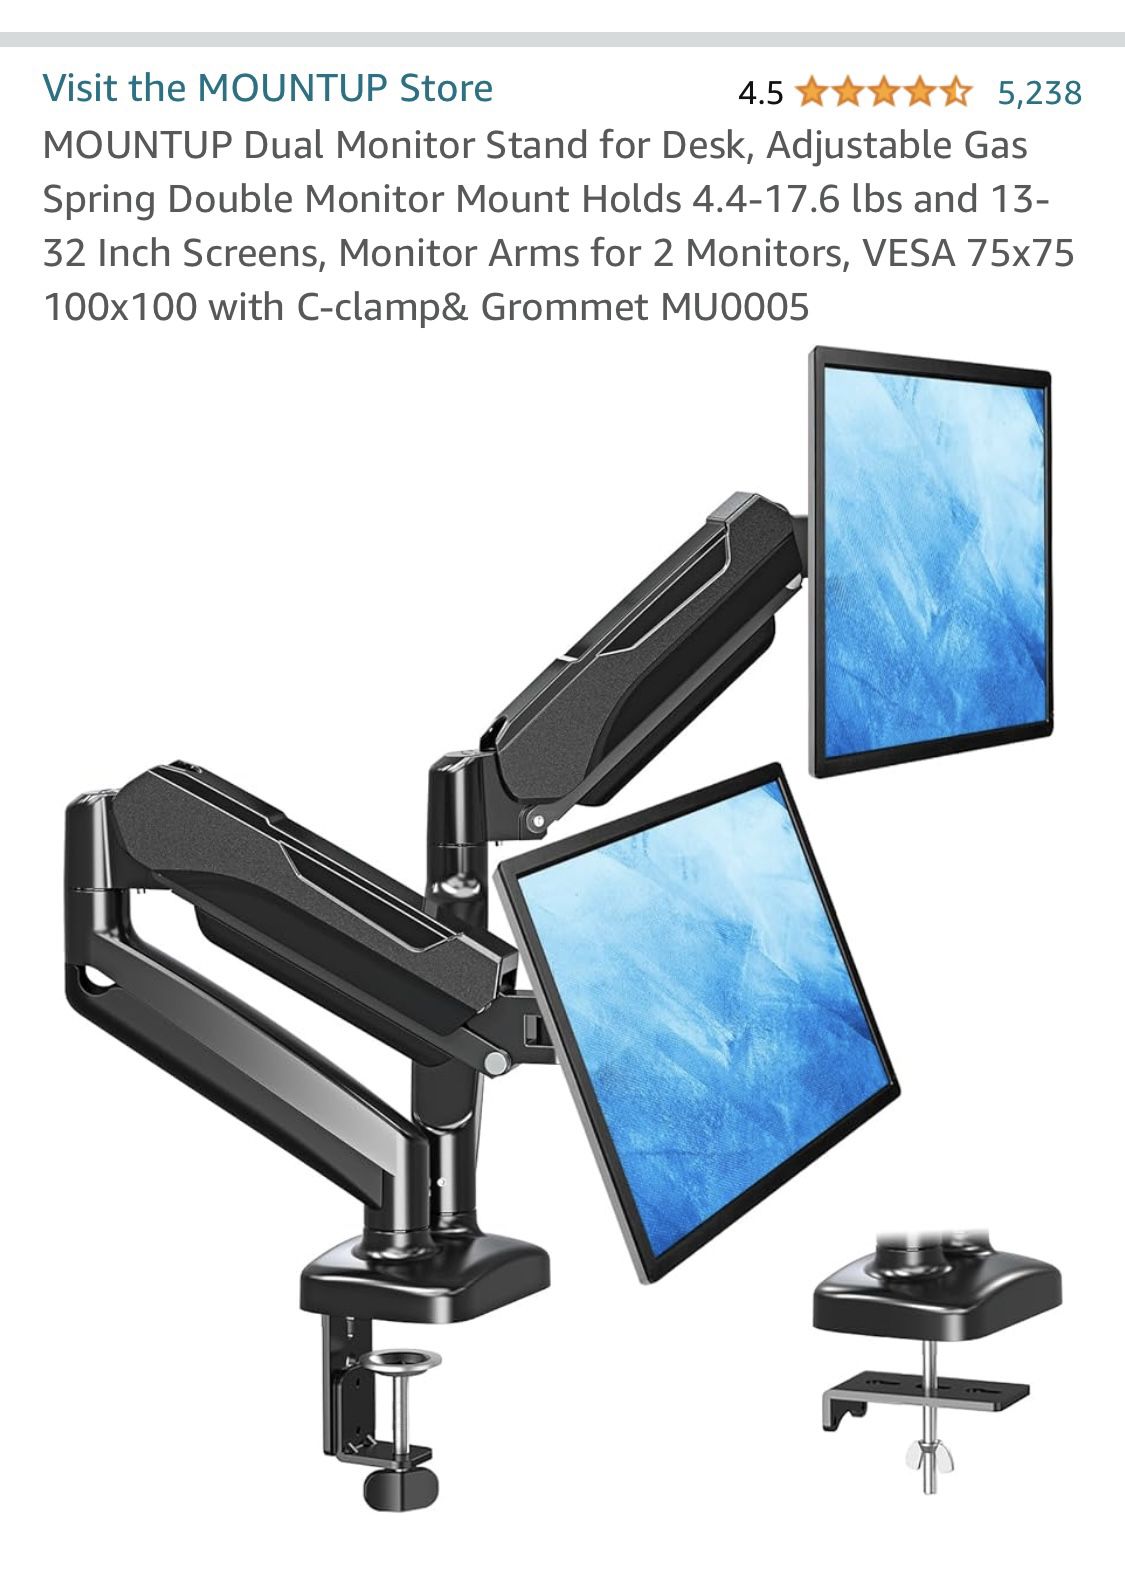 MOUNTUP Dual Monitor Stand For Desk